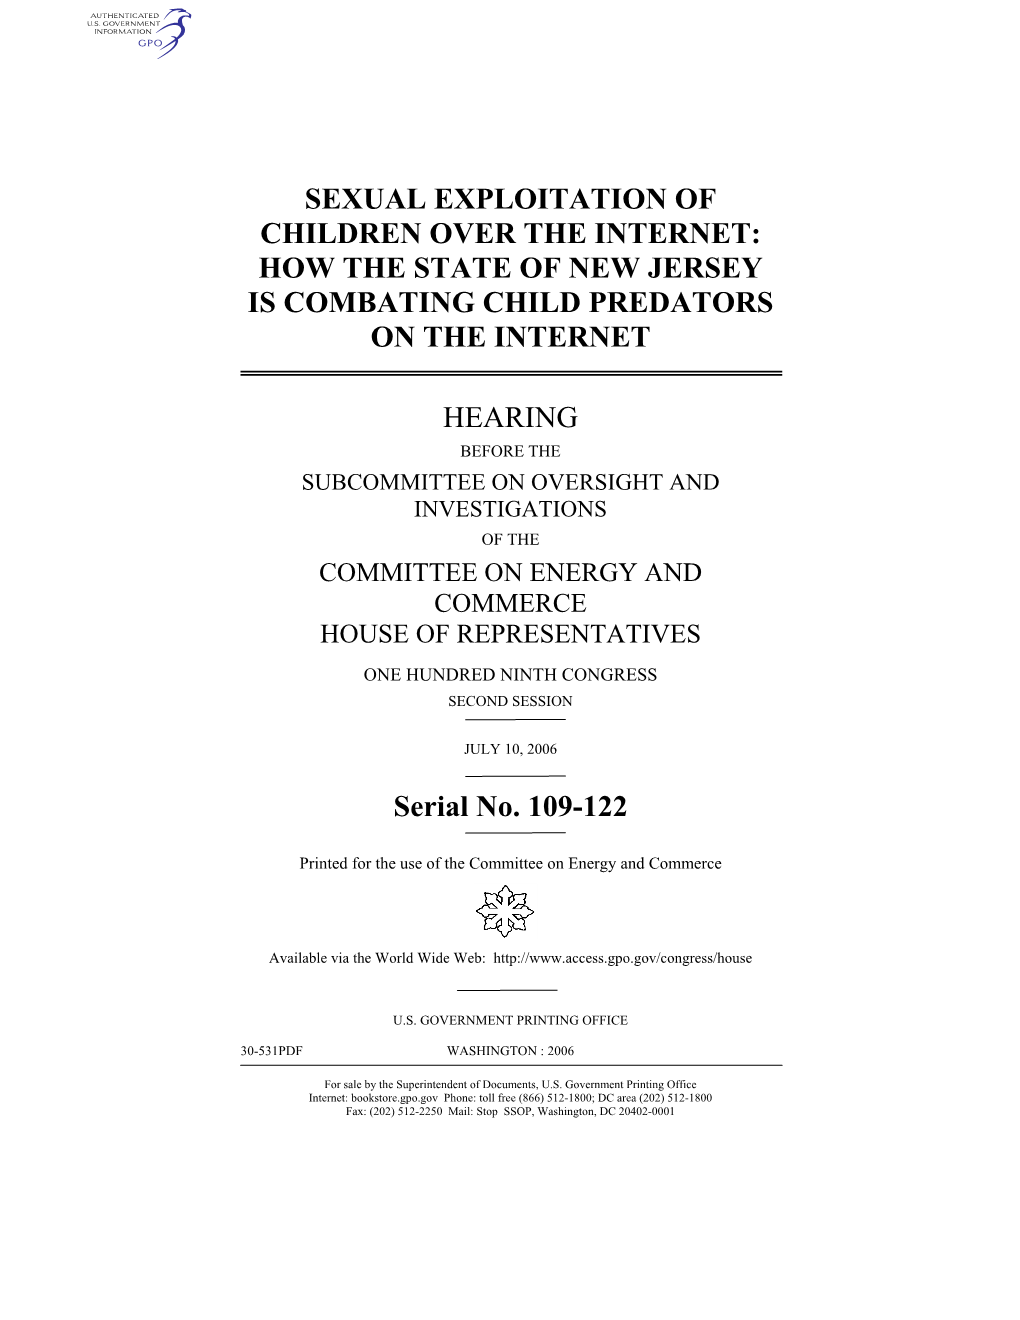 Sexual Exploitation of Children Over the Internet: How the State of New Jersey Is Combating Child Predators on the Internet